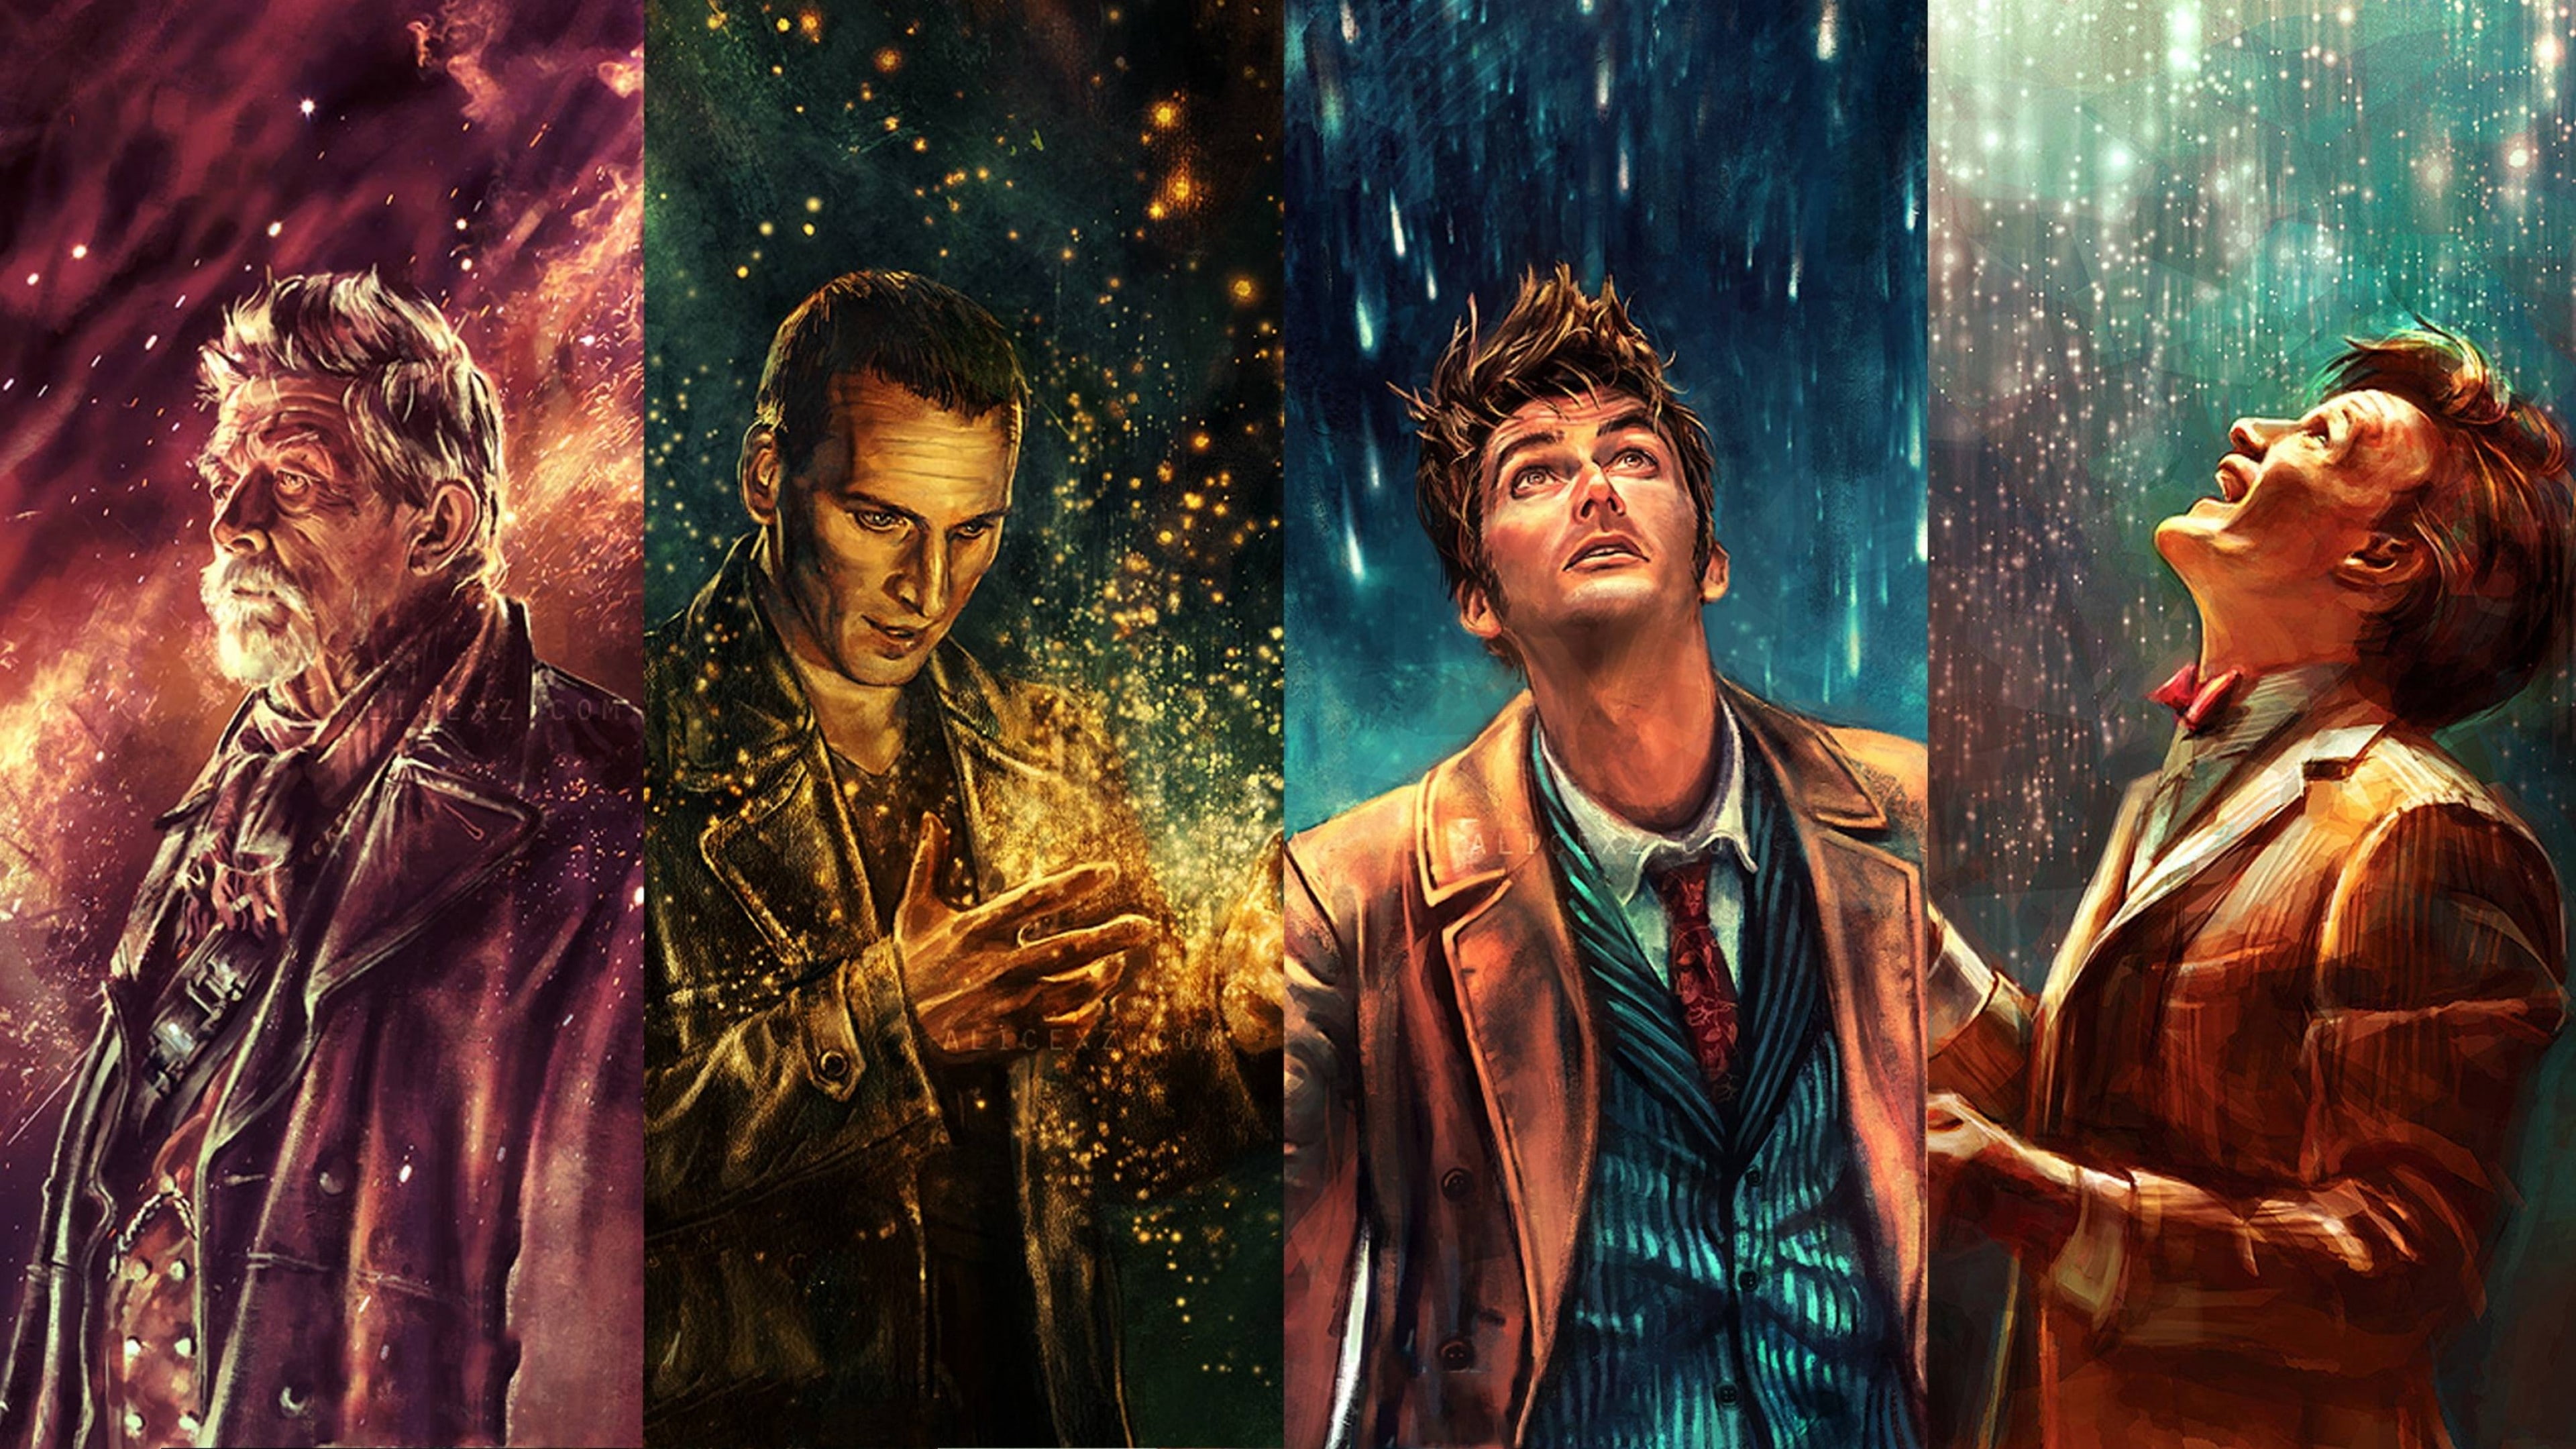 Tenth Doctor, War Doctor, Doctor Who, Eleventh Doctor, The Doctor